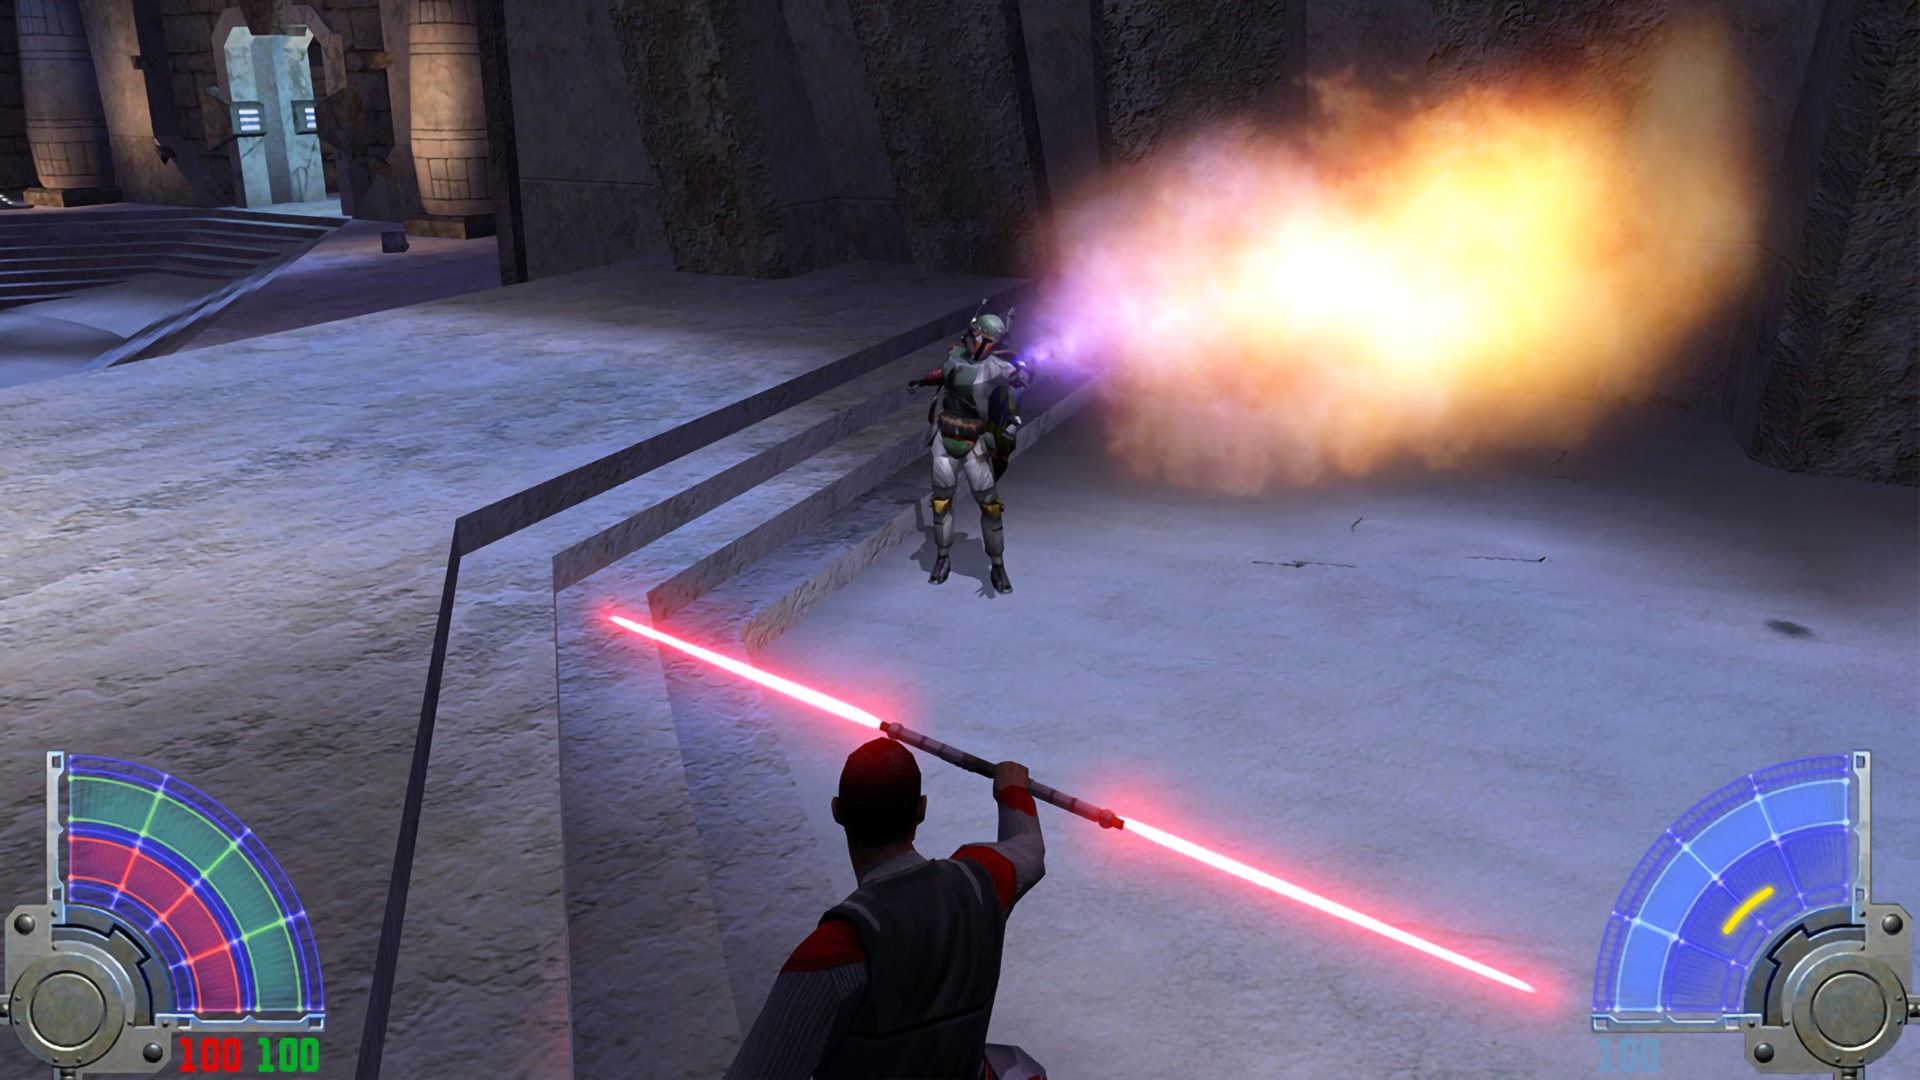 Guide: Star Wars Jedi Knight: Jedi Academy PS4 Cheats - Lightsaber Cheat, Force Cheats, God Mode and More